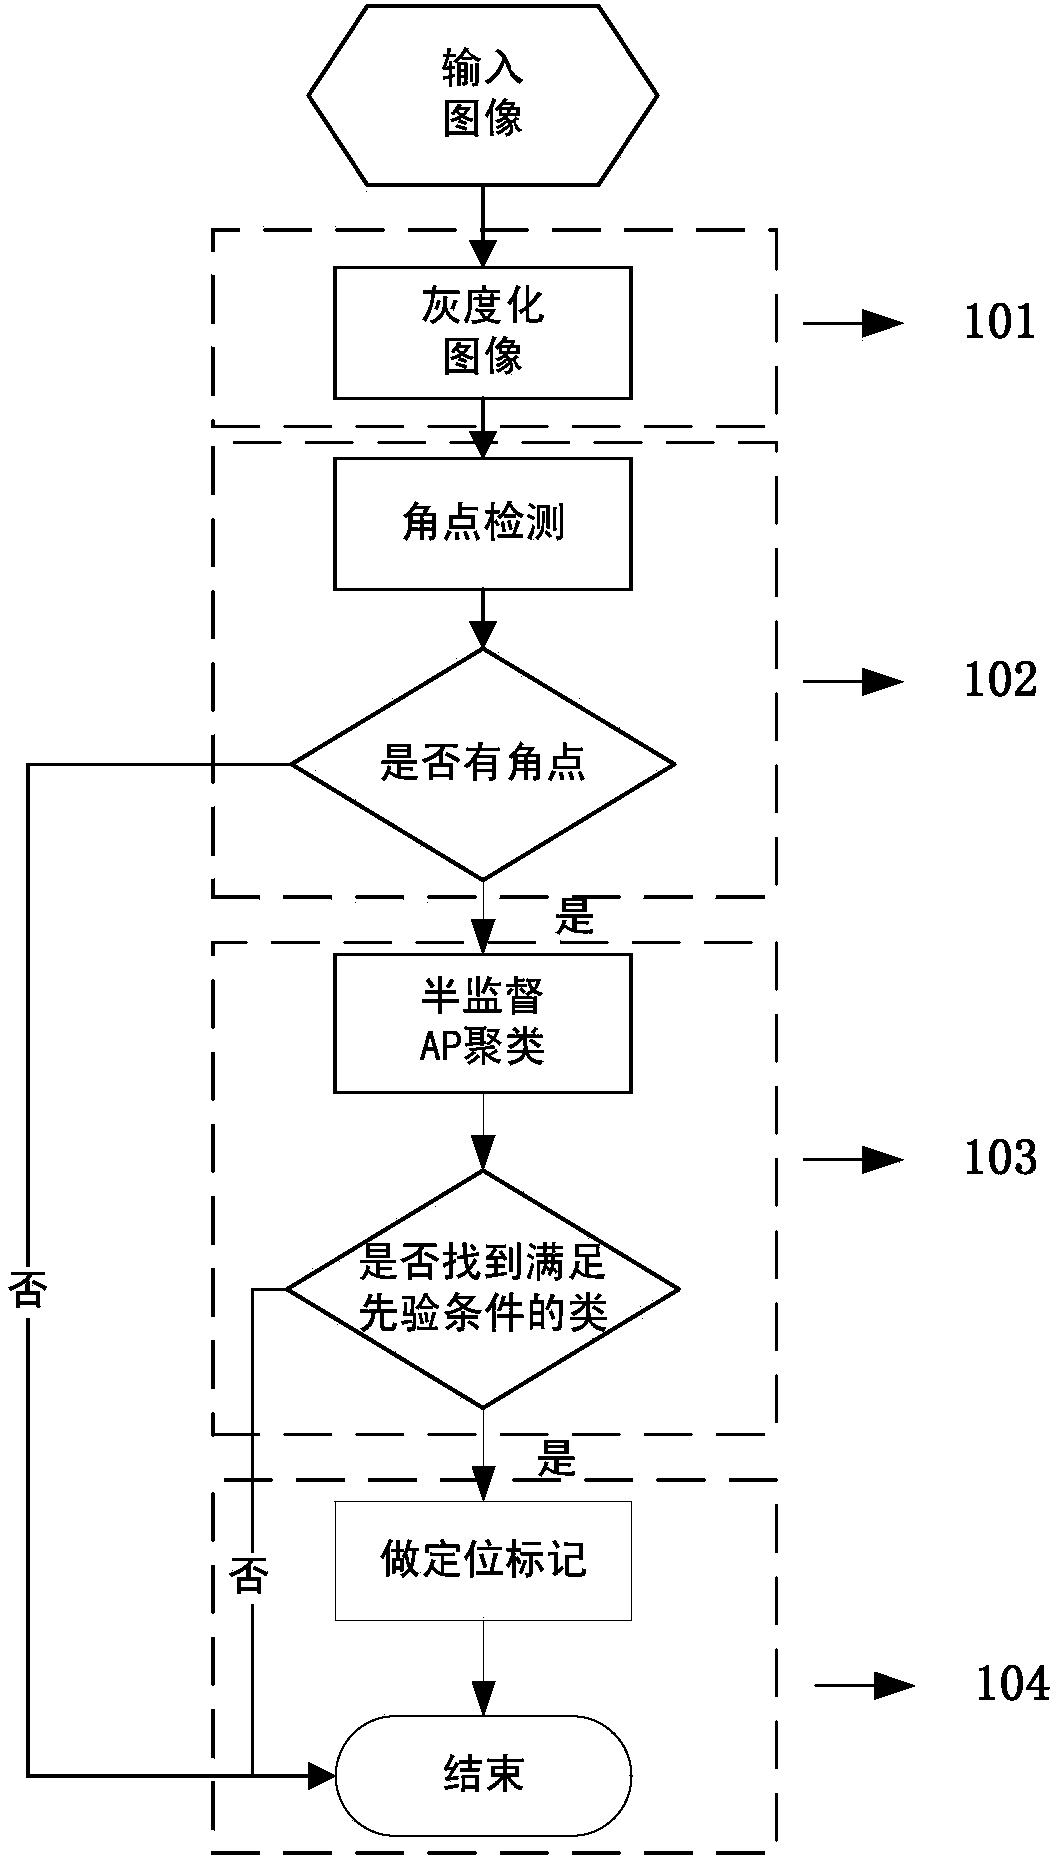 Method for positioning DPM two-dimension code area